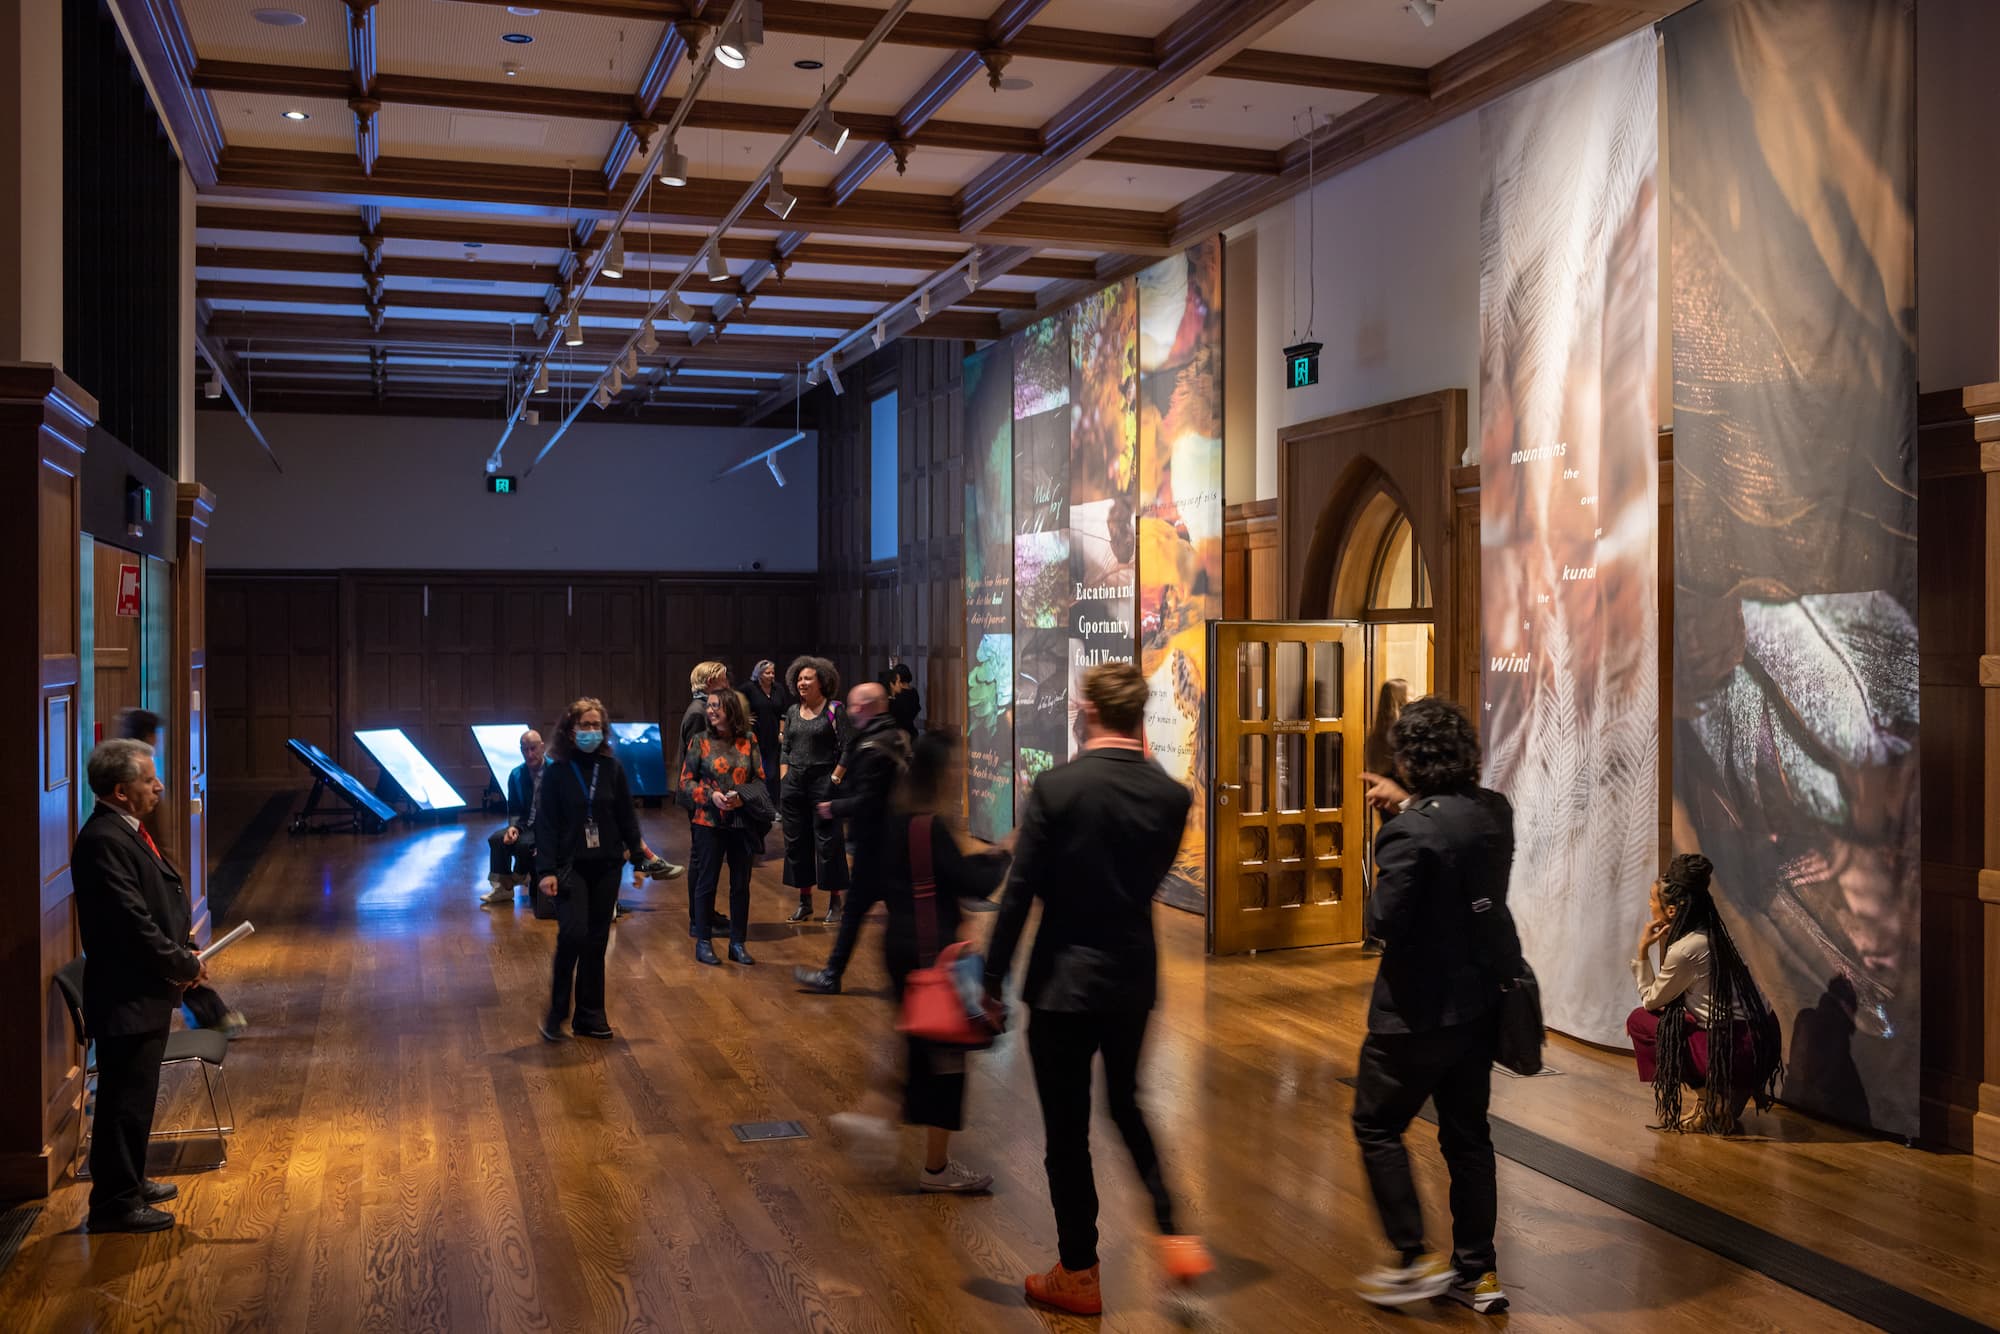 People walk through Old Quad gallery with screens on floor in background